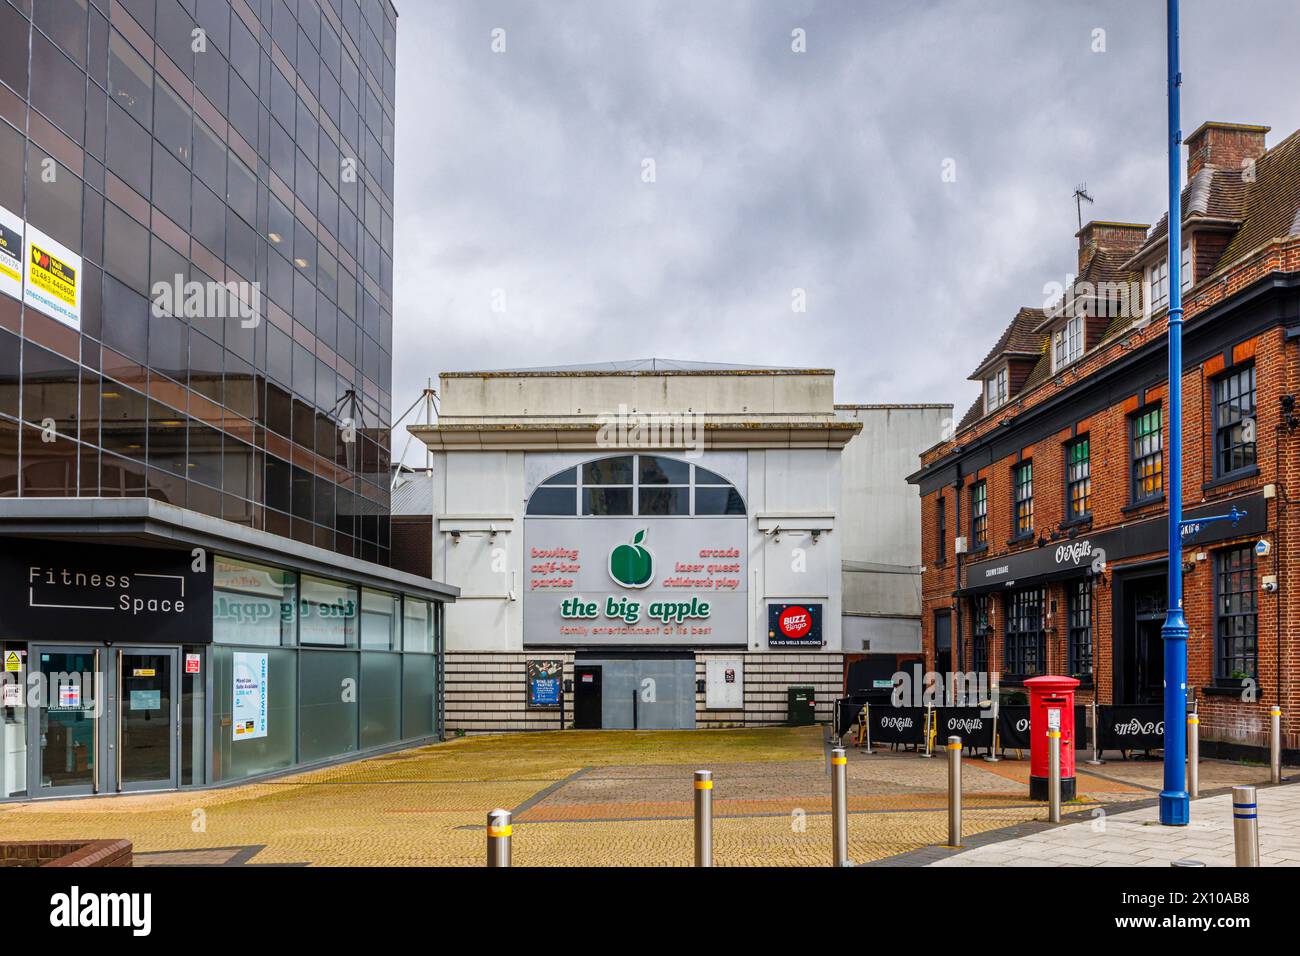 The Big Apple, a closed, boarded up and disused family entertainment centre in central Woking, a town in Surrey, England Stock Photo